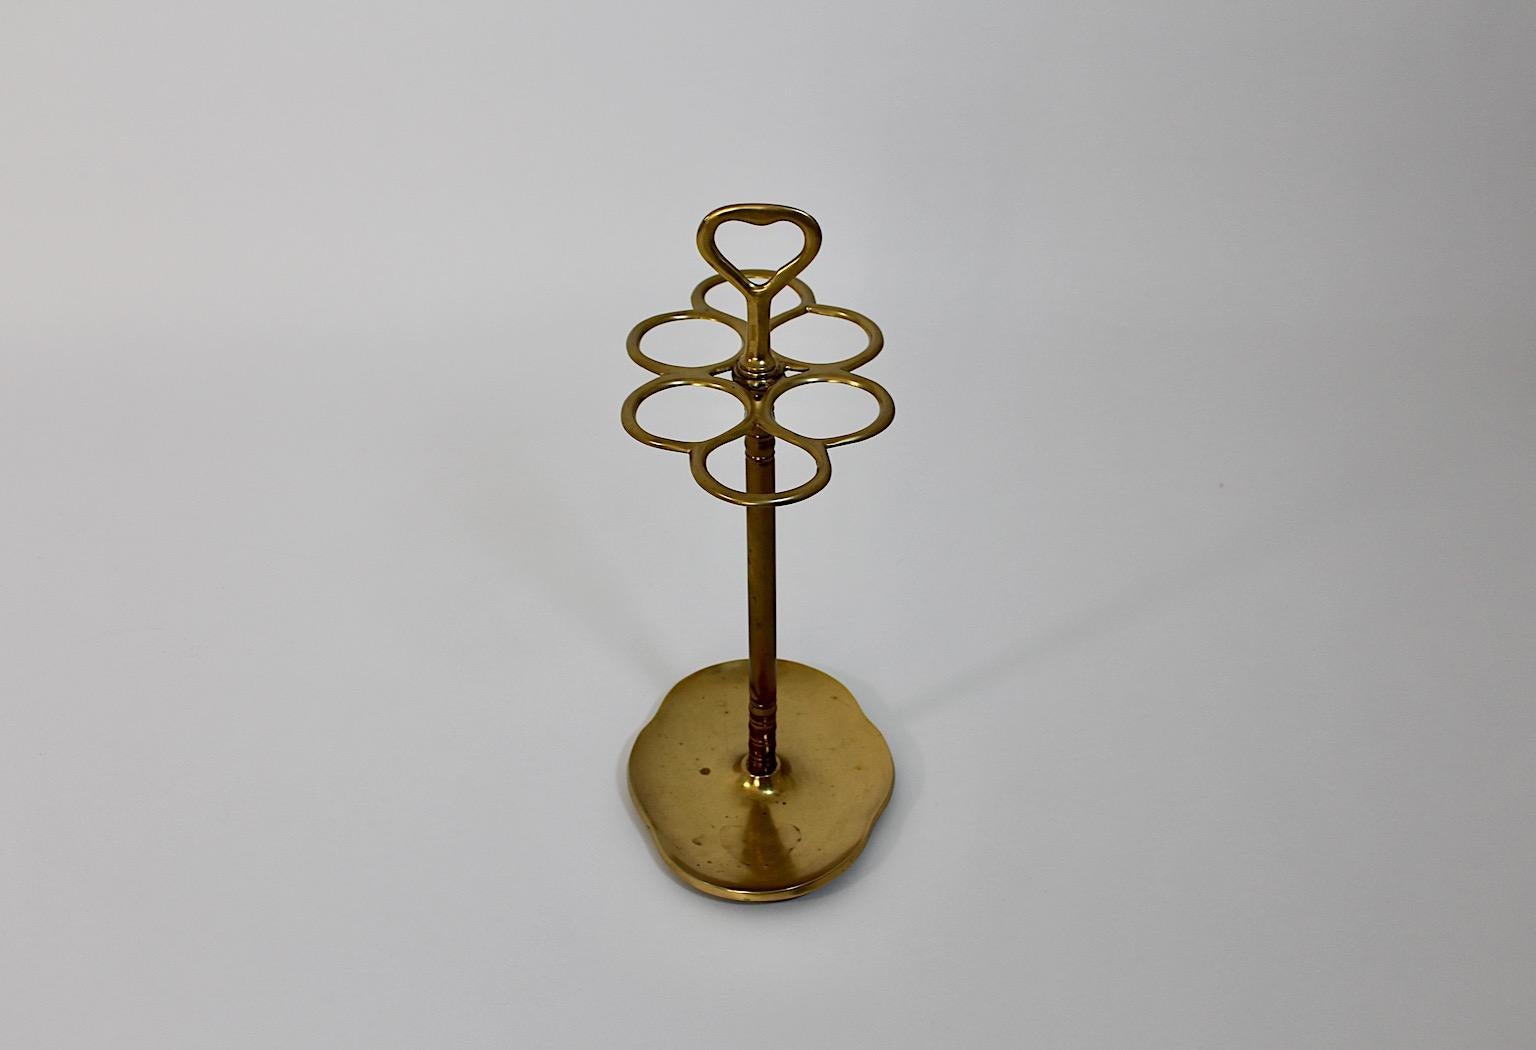 Hollywood Regency Style Vintage Brass Umbrella Stand Cane Holder 1970s Italy For Sale 4